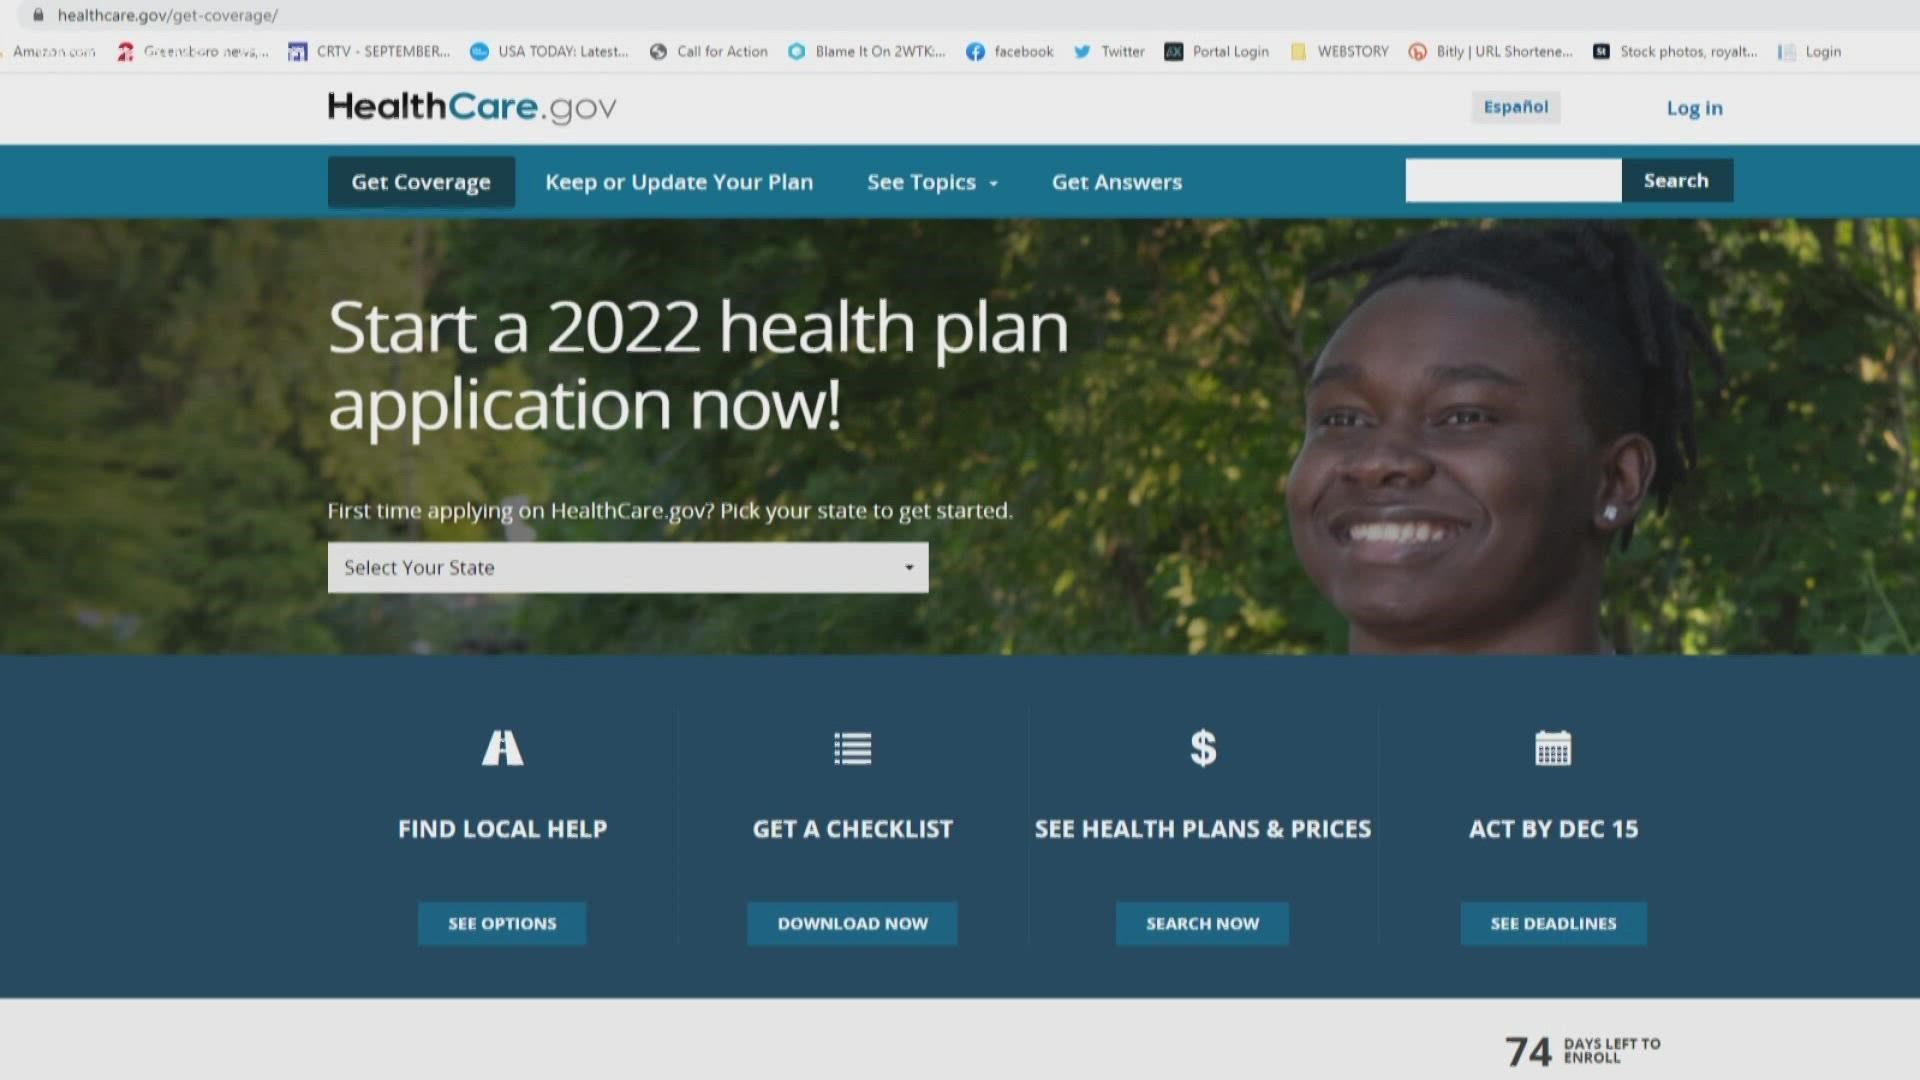 Wednesday is the last day for the Affordable Care Act health care enrollment.